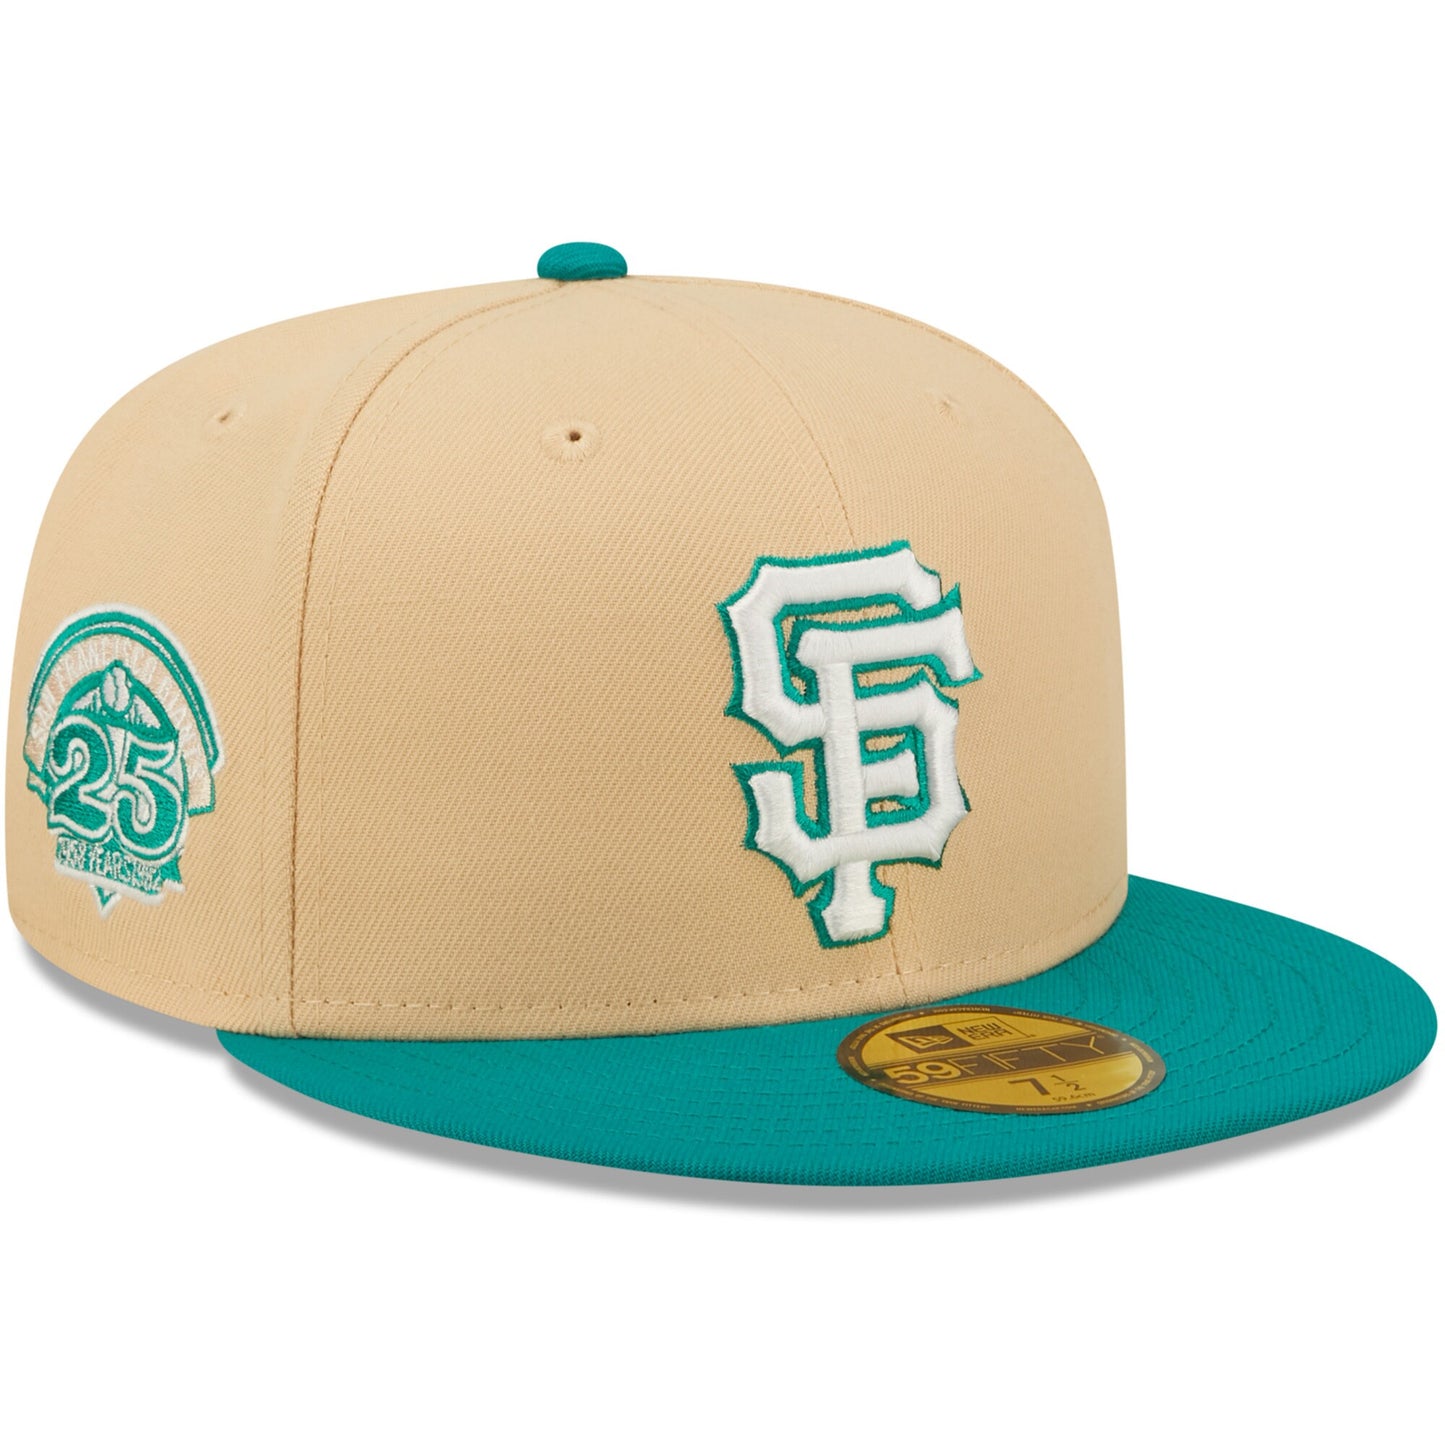 San Francisco Giants New Era Mango Forest 59FIFTY fitted hat - Natural/Teal